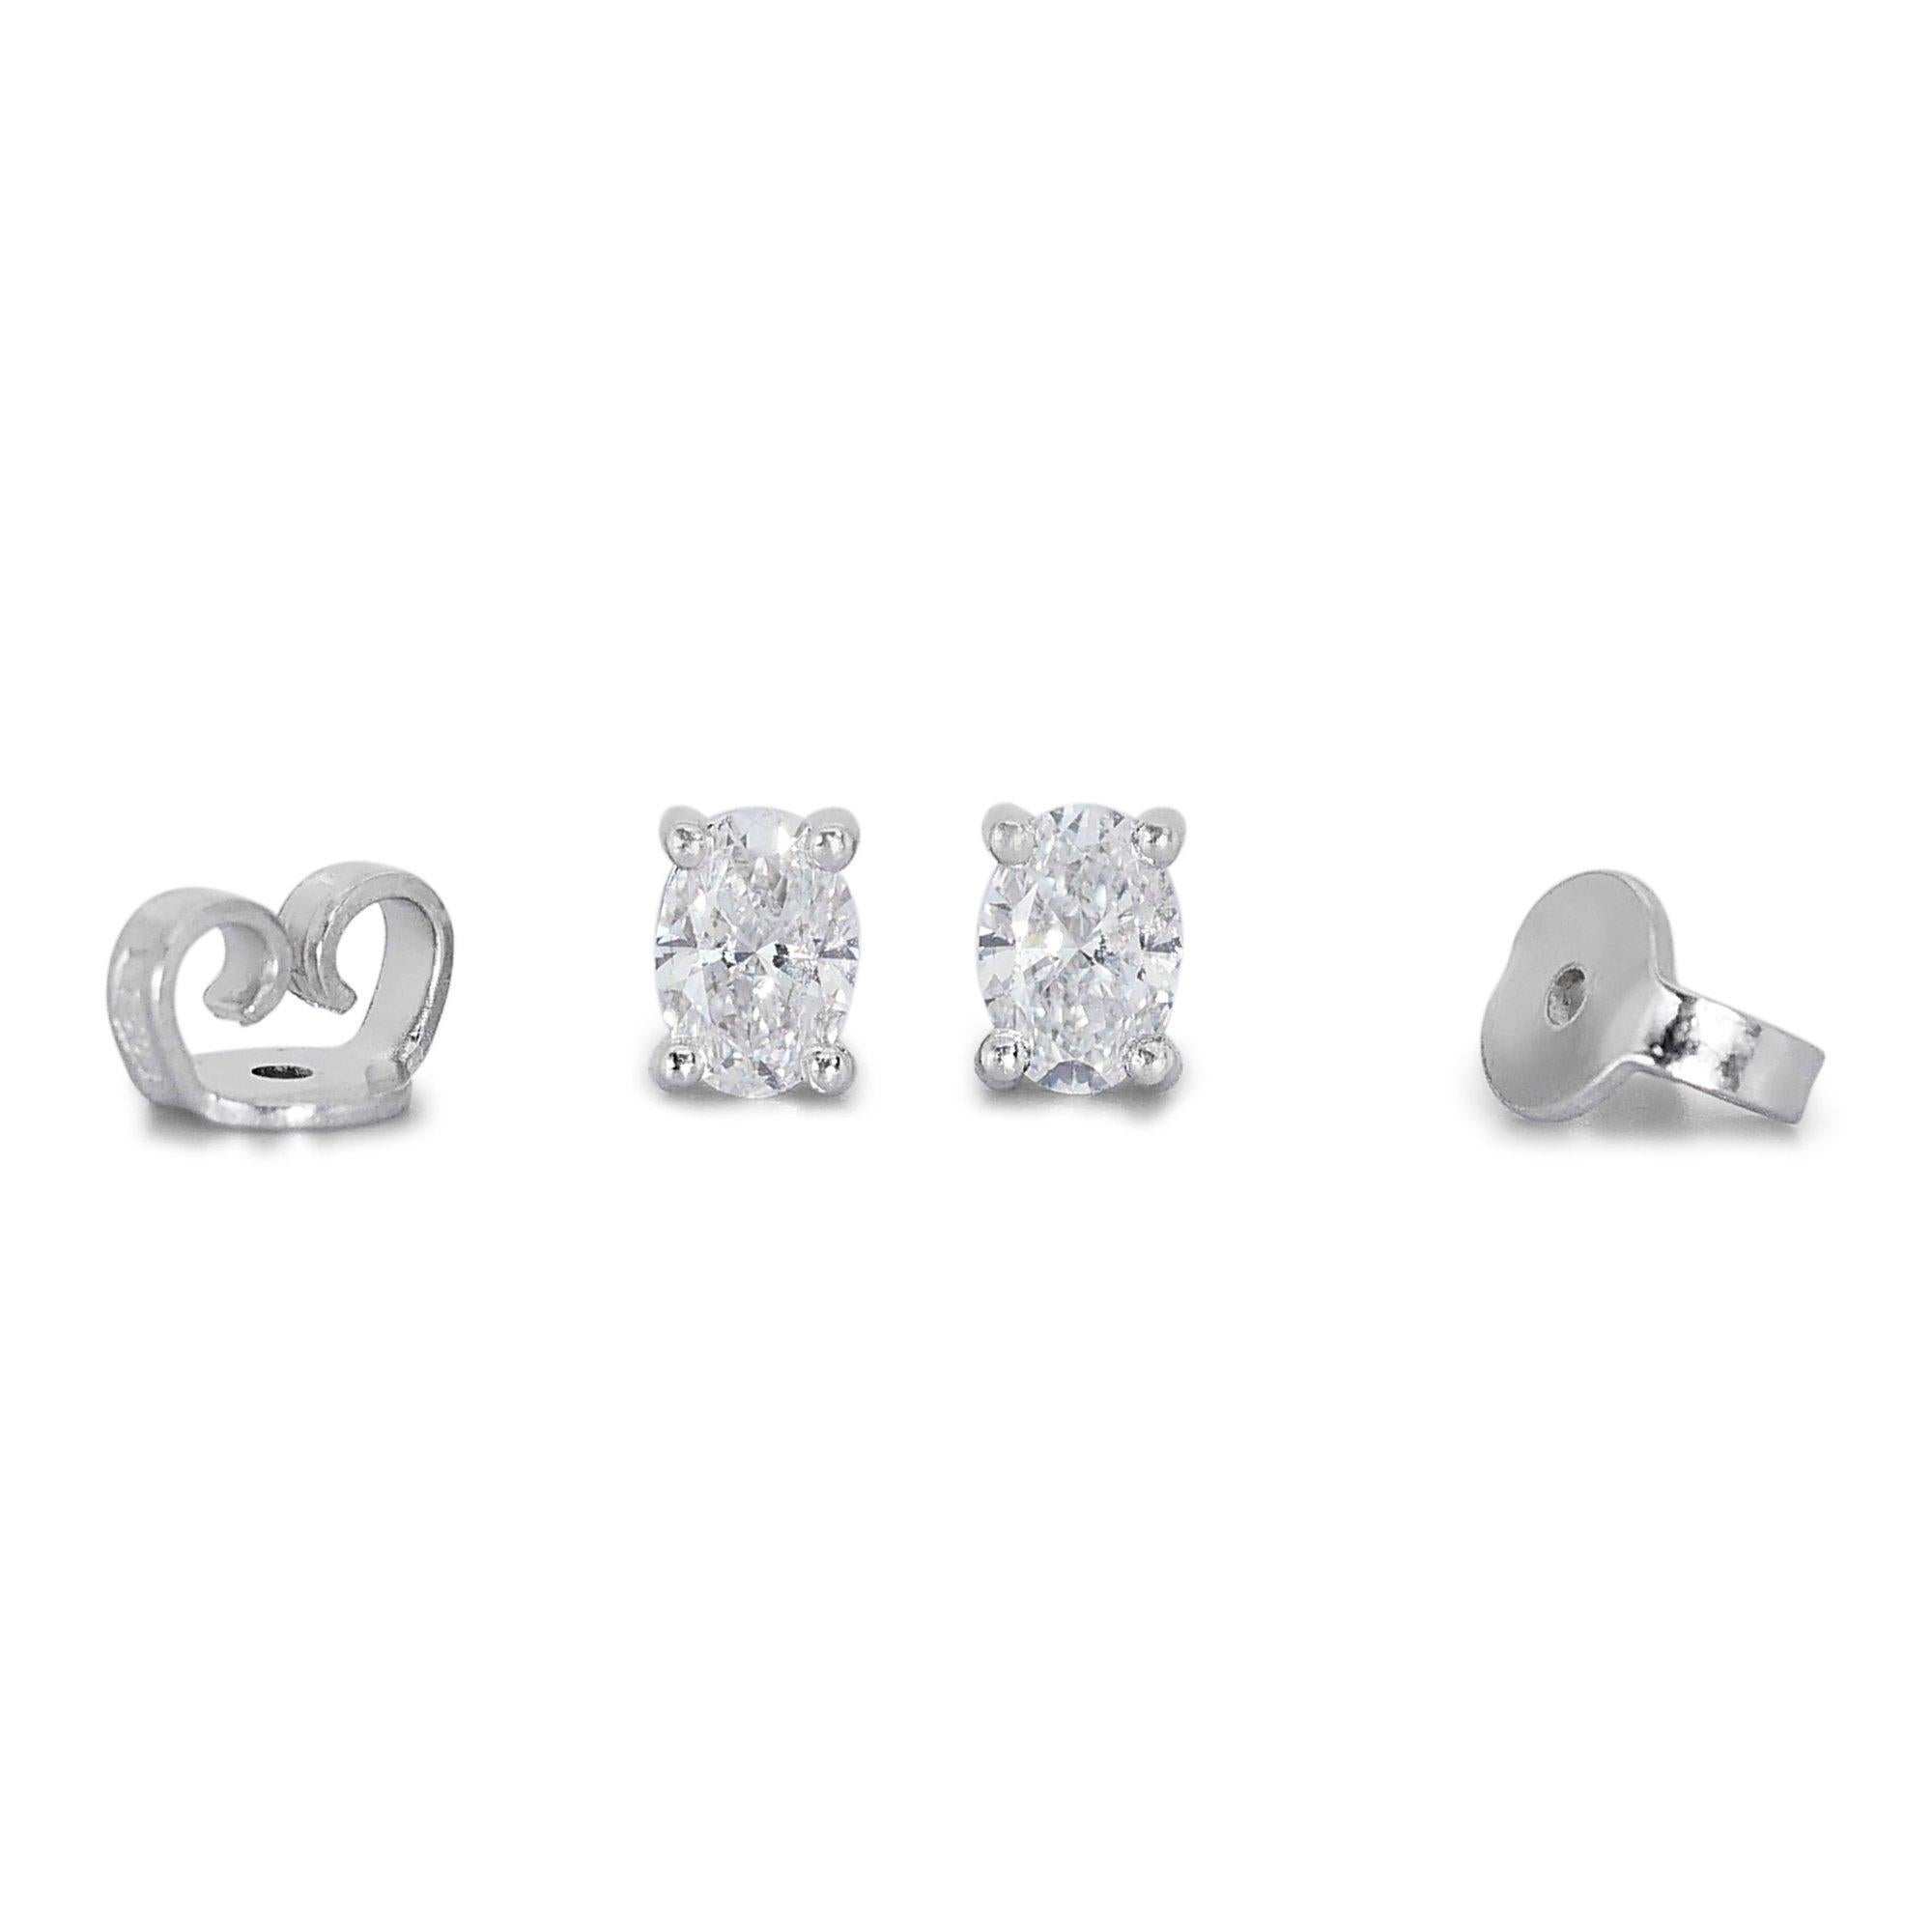 Sparkling 1.82ct Diamond Stud Earrings in 18k White Gold - GIA Certified  In New Condition For Sale In רמת גן, IL